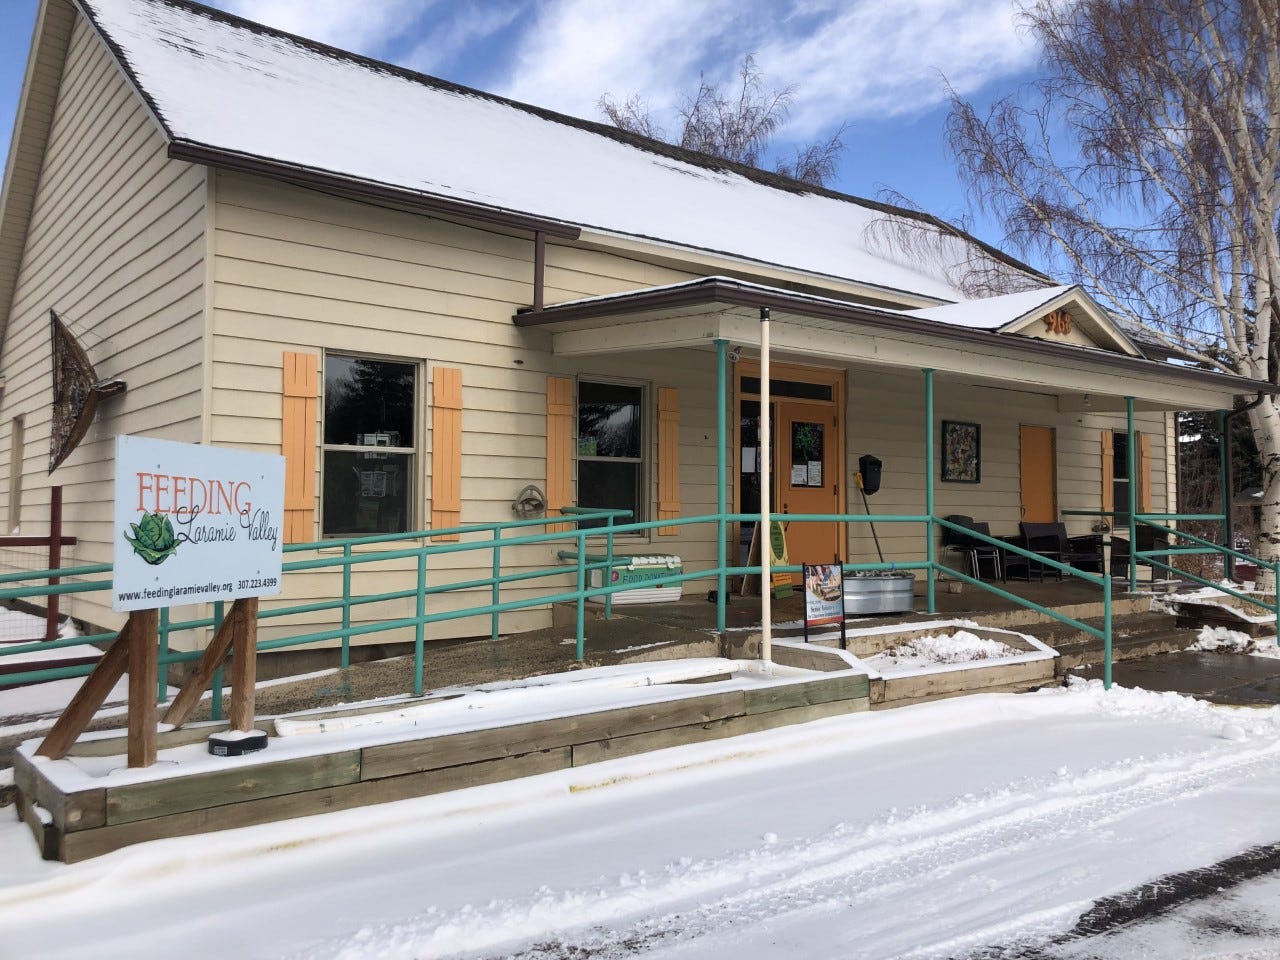 Beige building with orange trim and green railings is covered with snow on an early spring day. A sign reads "Feeding Laramie Valley"